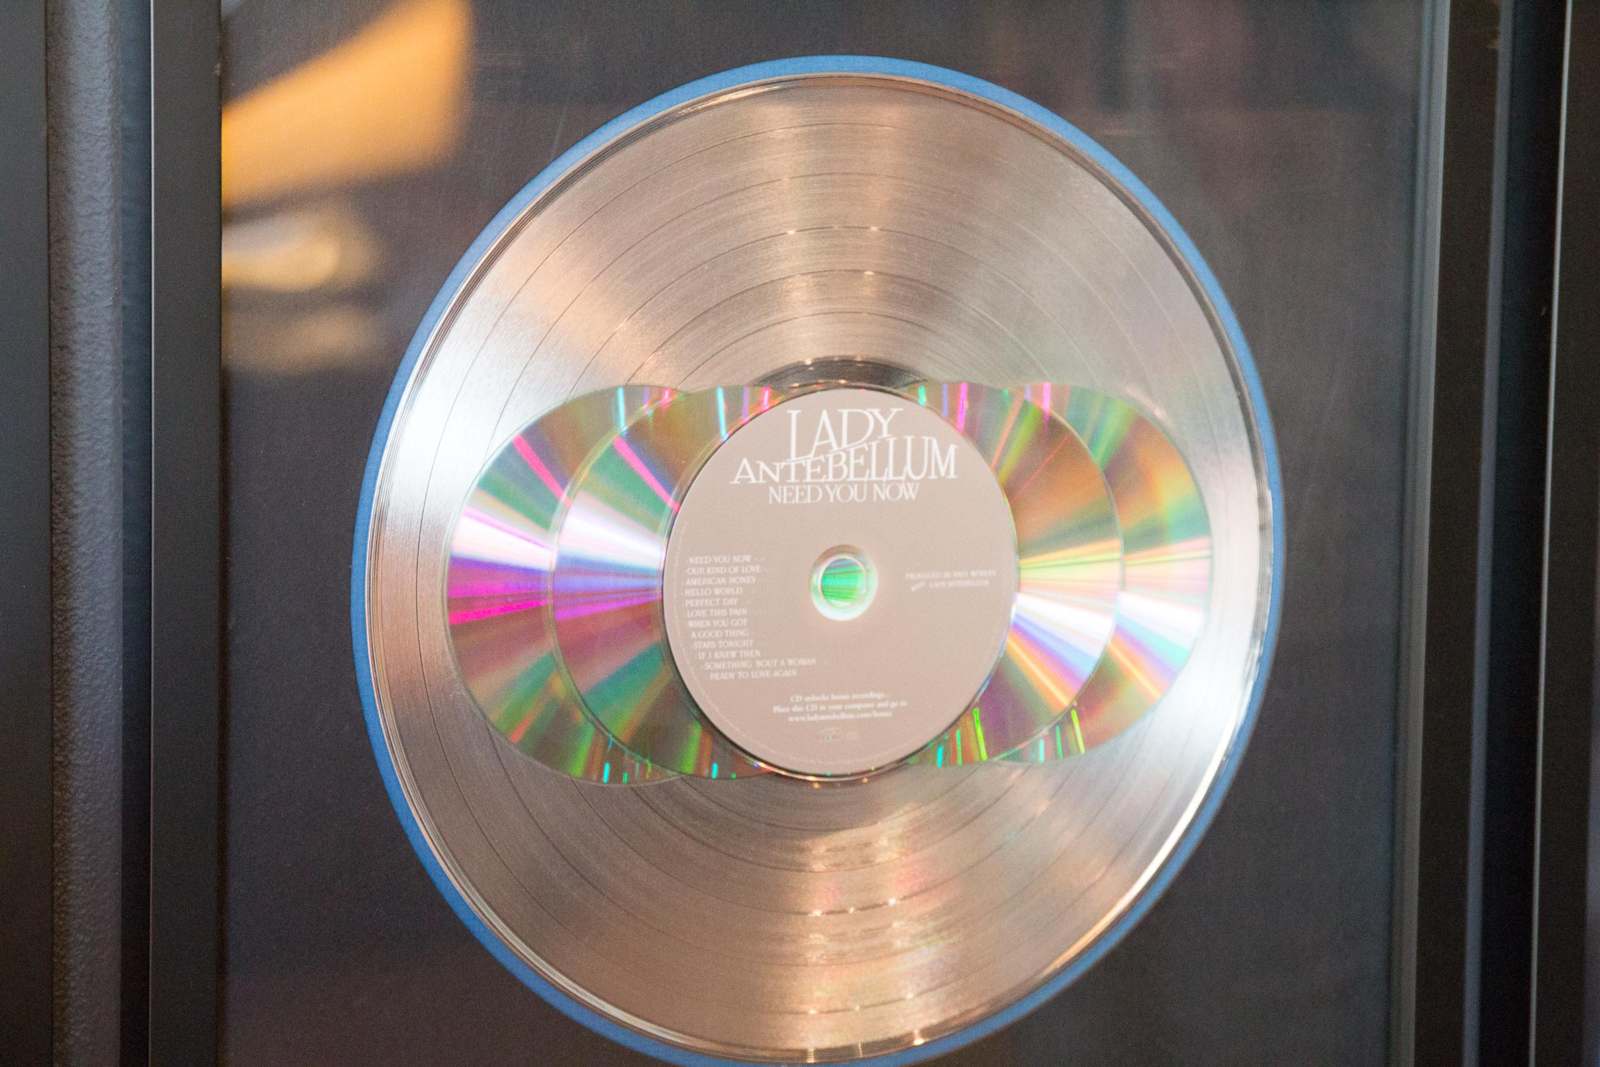 a silver disc with a label on it